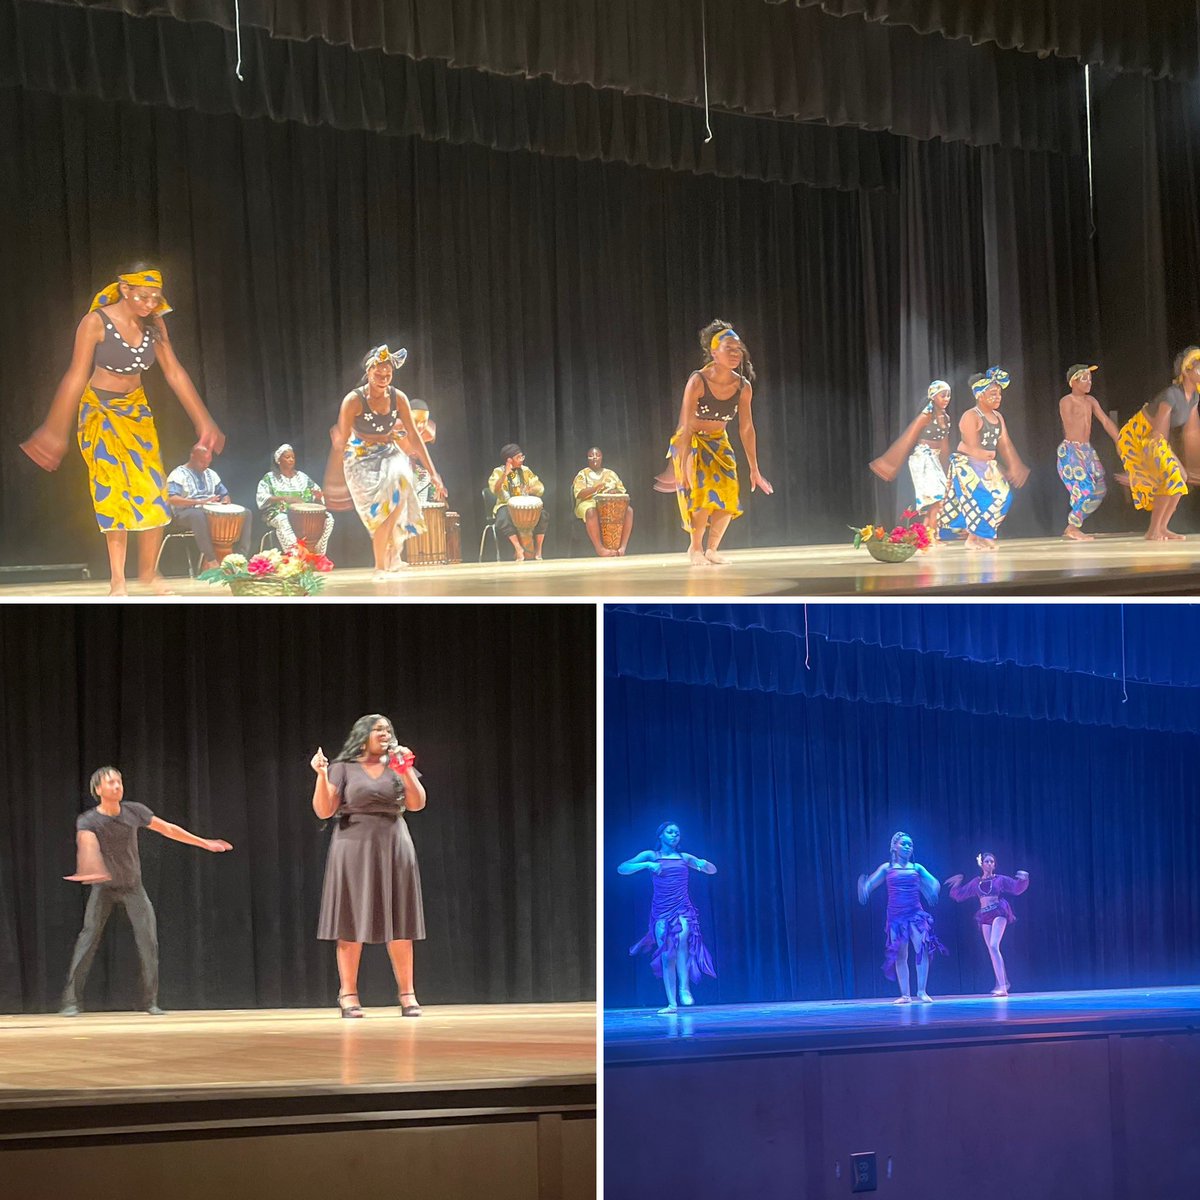 Tonight's Spring Dance Concert was a Beautiful display of talent from the students in the Carver Cluster! Kudos to the staff & students who poured their hearts into making this event a resounding Success. We CELEBRATE the artistry & passion you bring to the stage! #OneCarver